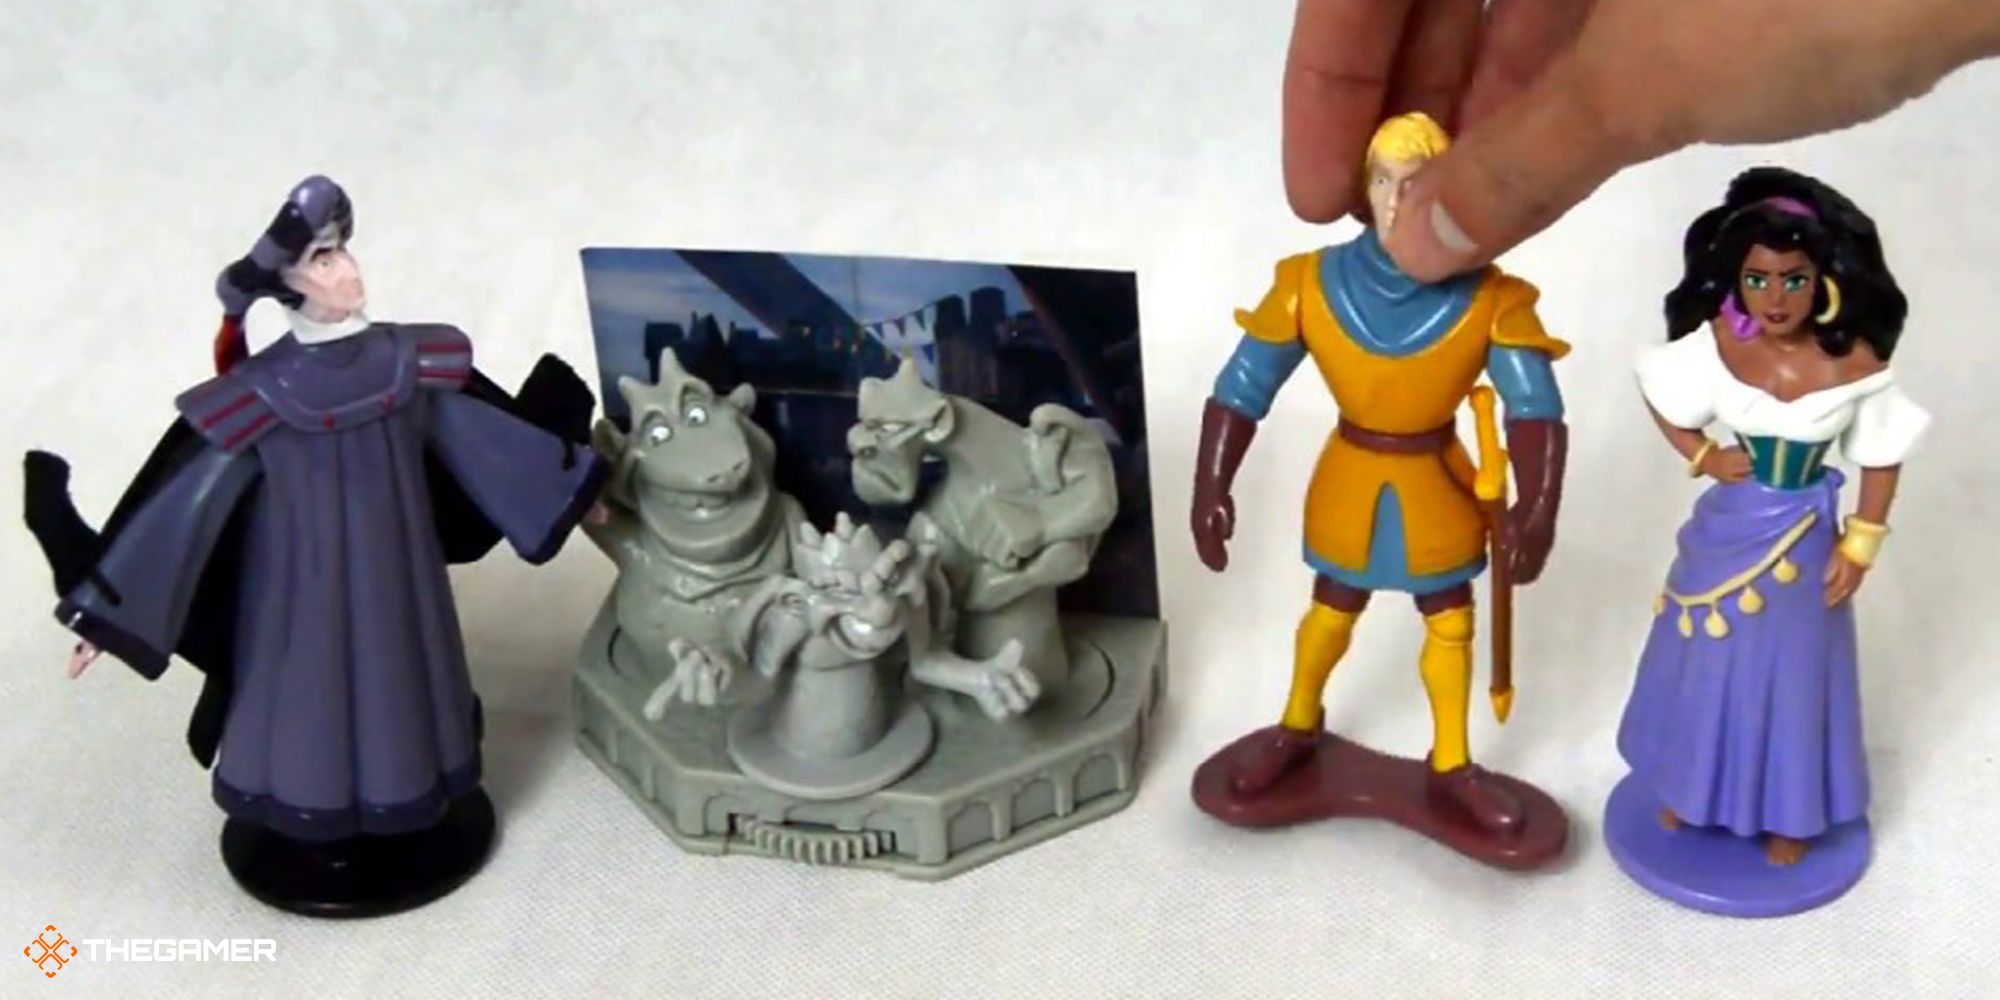 Hunchback of Notre Dame characters - Happy Meal Toys, McDonalds